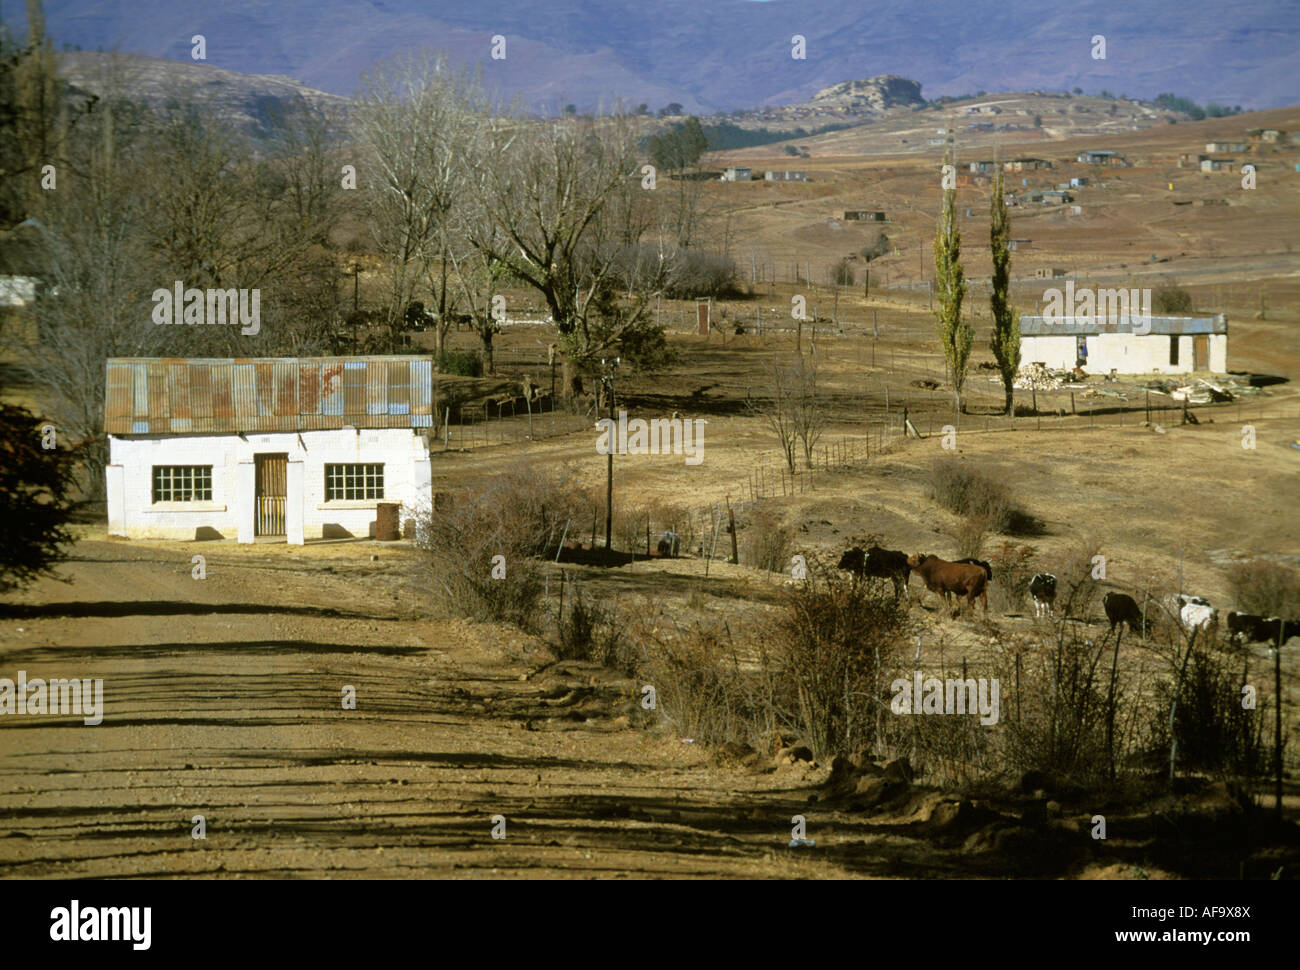 Rural landscape showing a small dilapidated white house set in a semi-arid mountainous area, with cows grazing in nearby field. Stock Photo